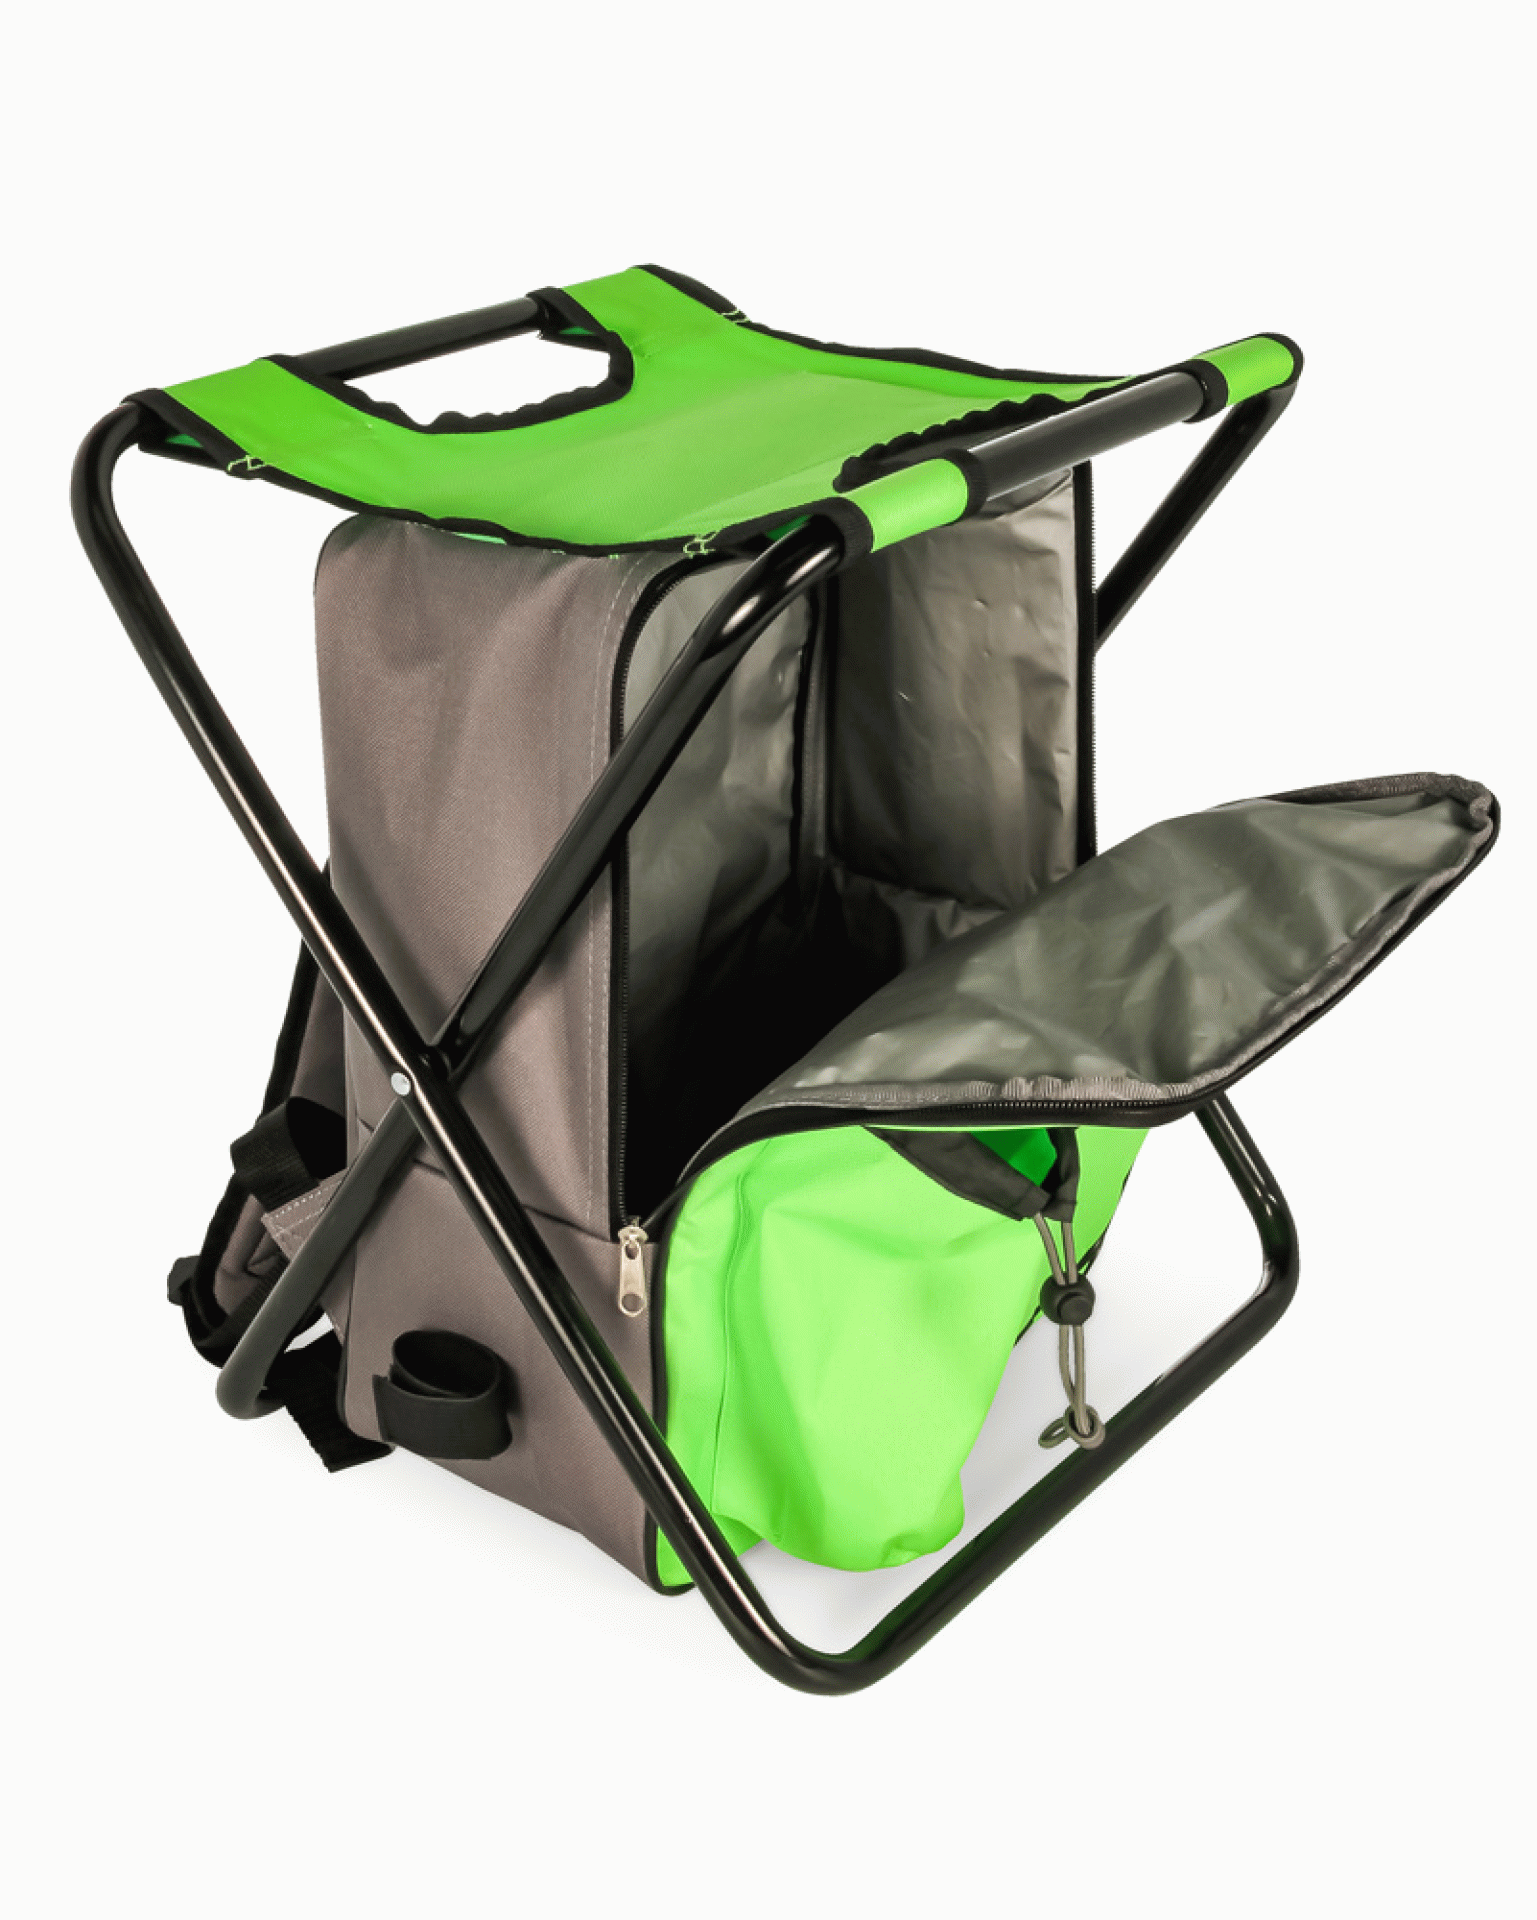 CAMCO MFG INC | 51909 | Camping Stool Backpack/Cooler - Green